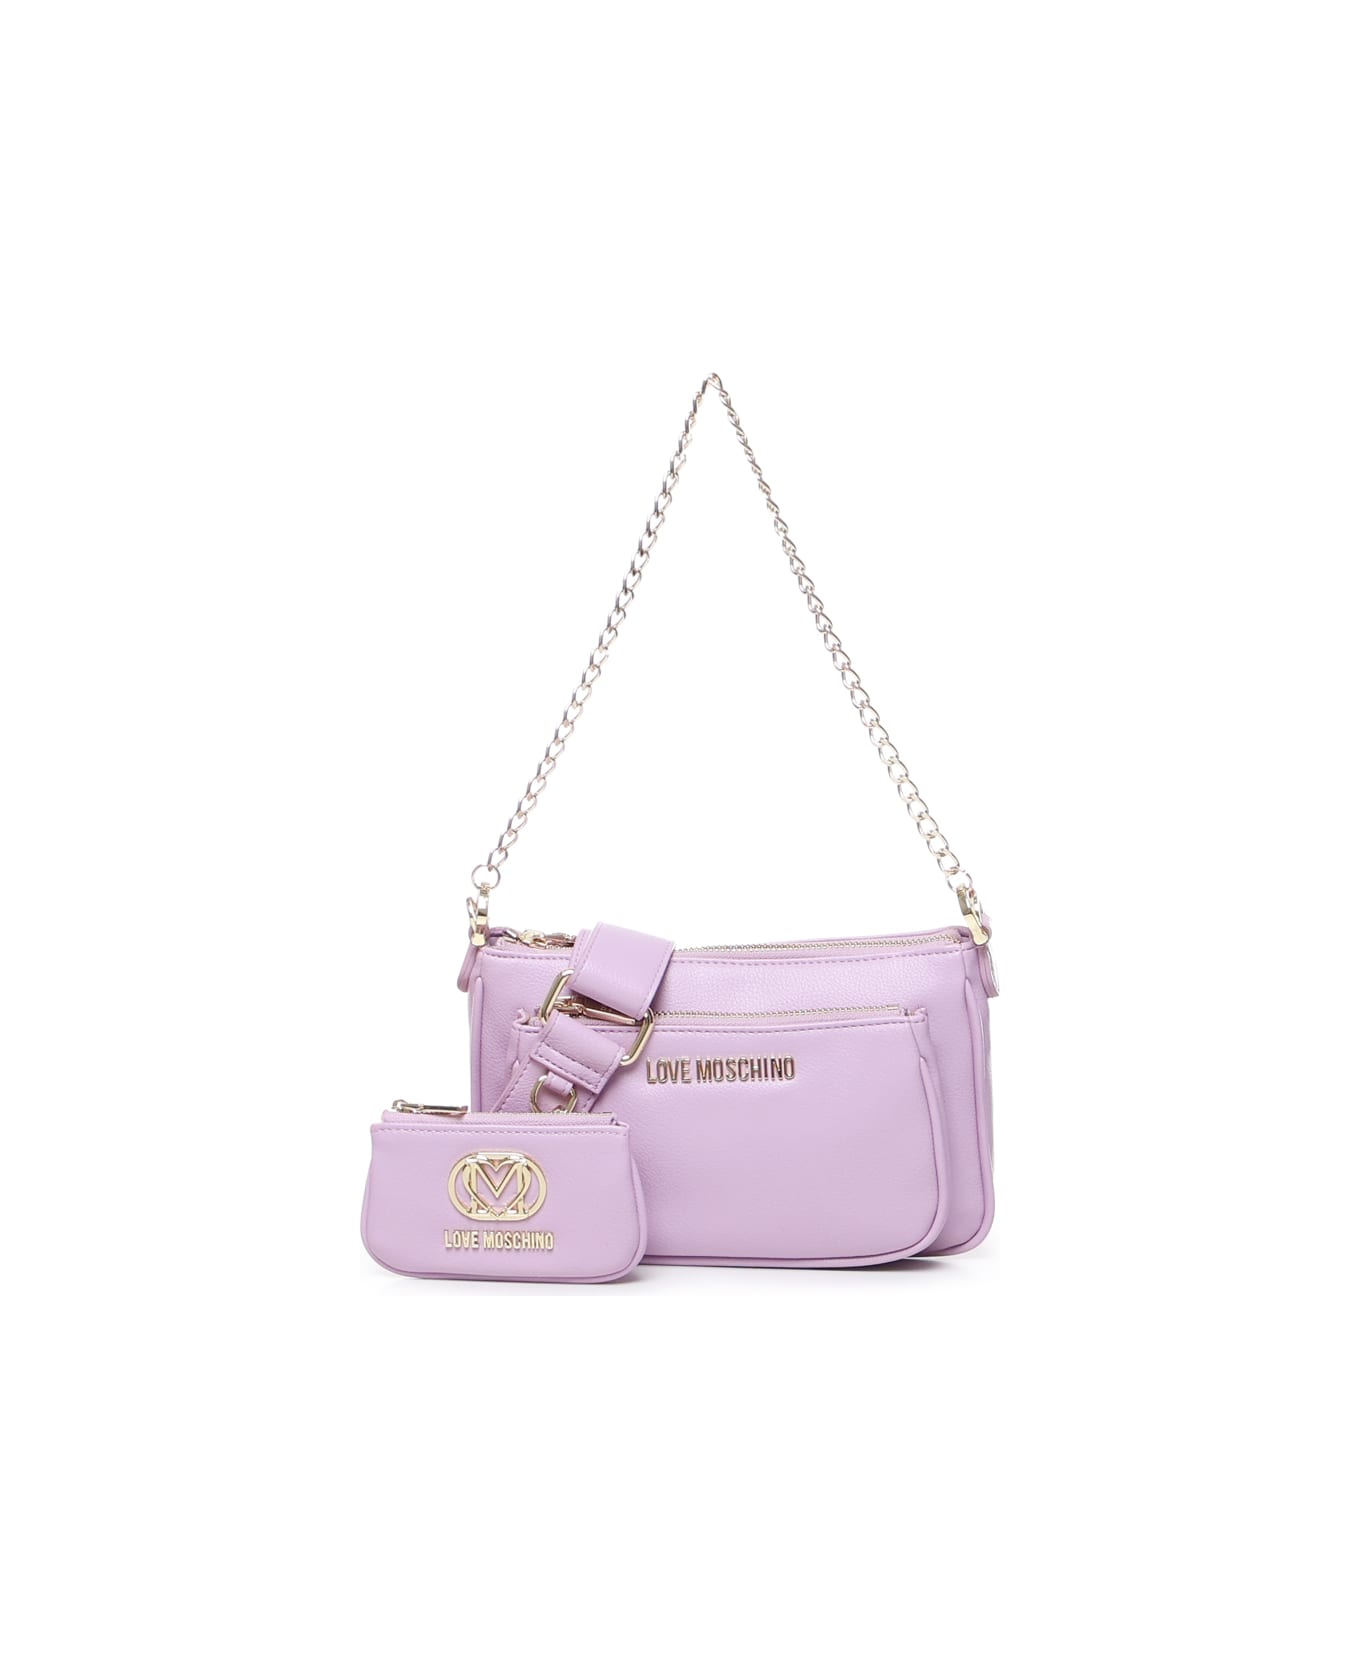 Love Moschino Pouch Charm Shoulder Bag - Lillac ショルダーバッグ